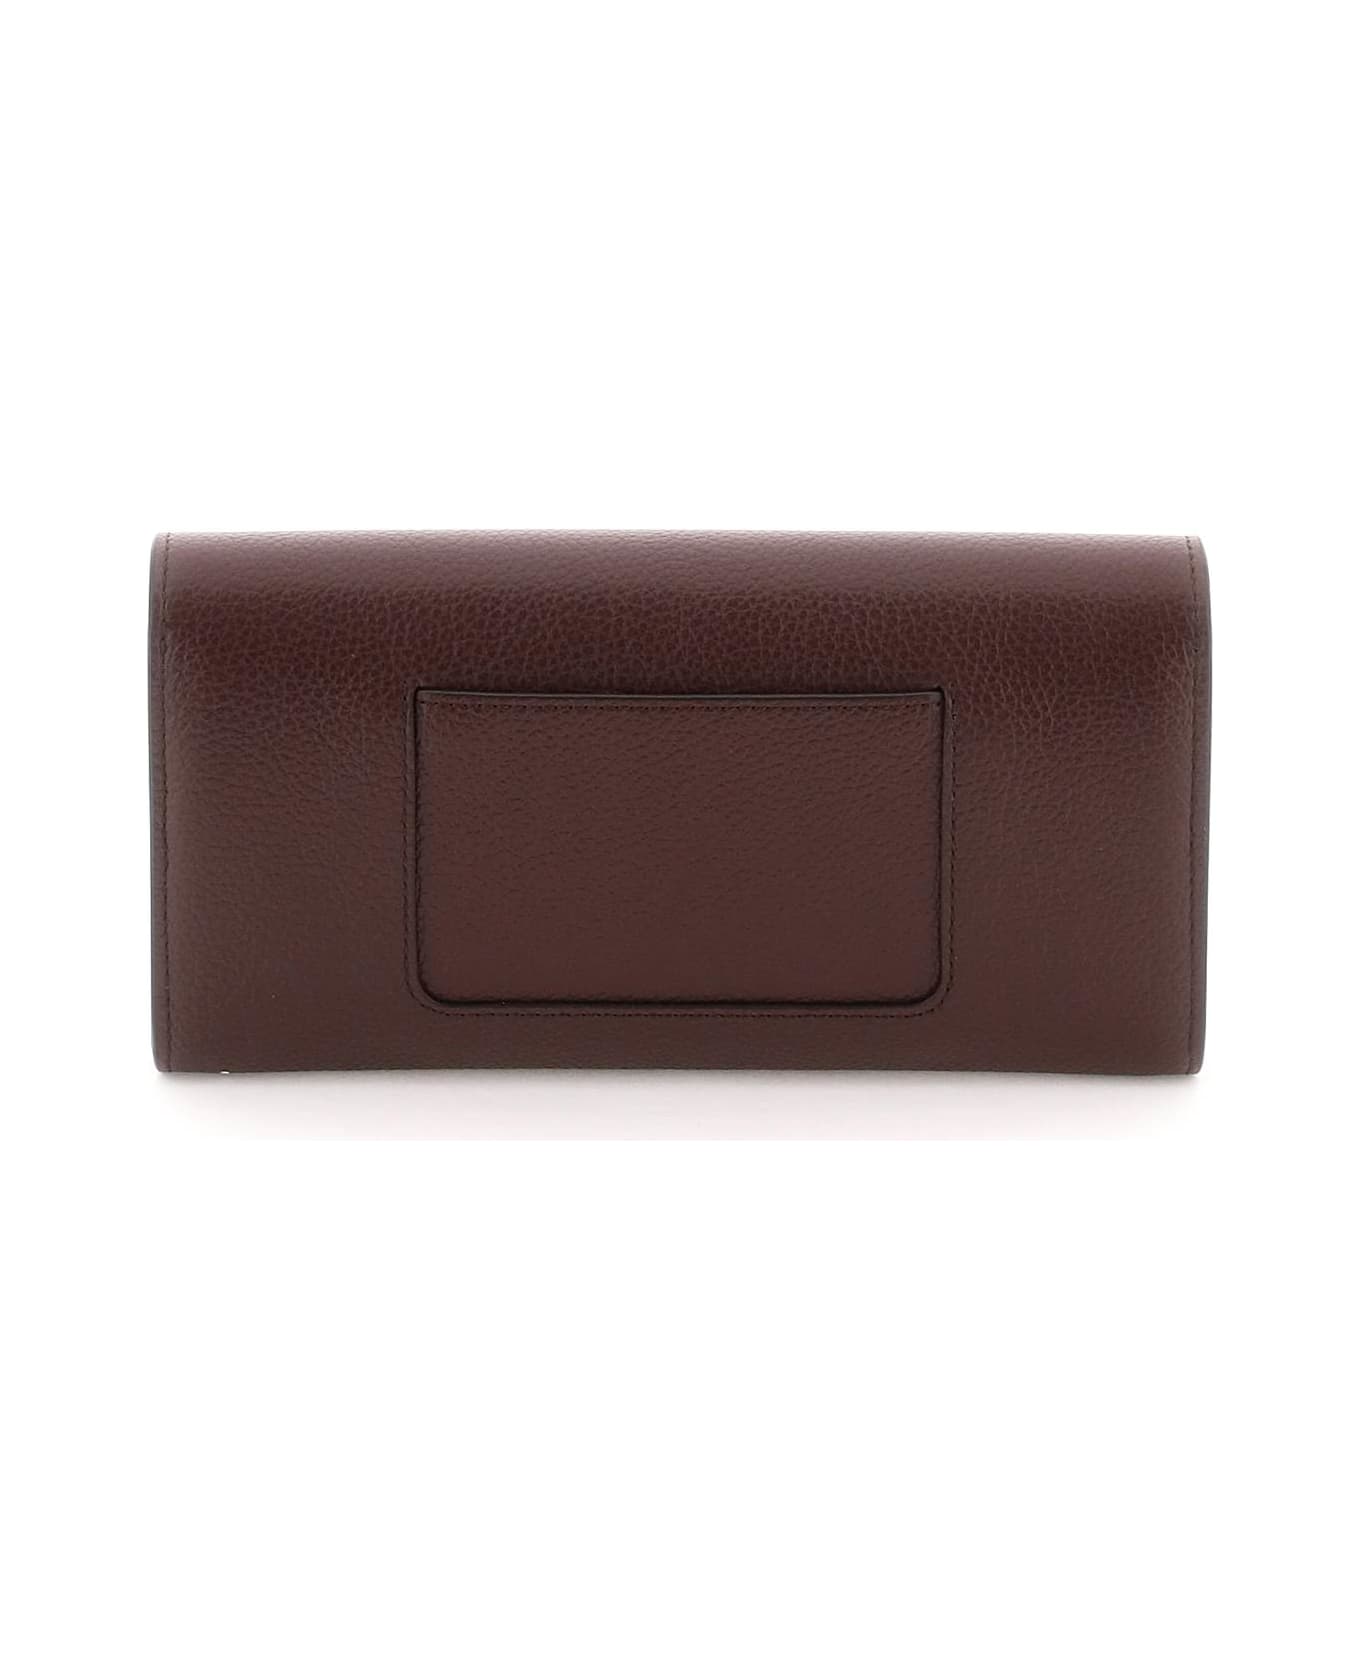 Mulberry 'darley' Wallet - OXBLOOD (Red)